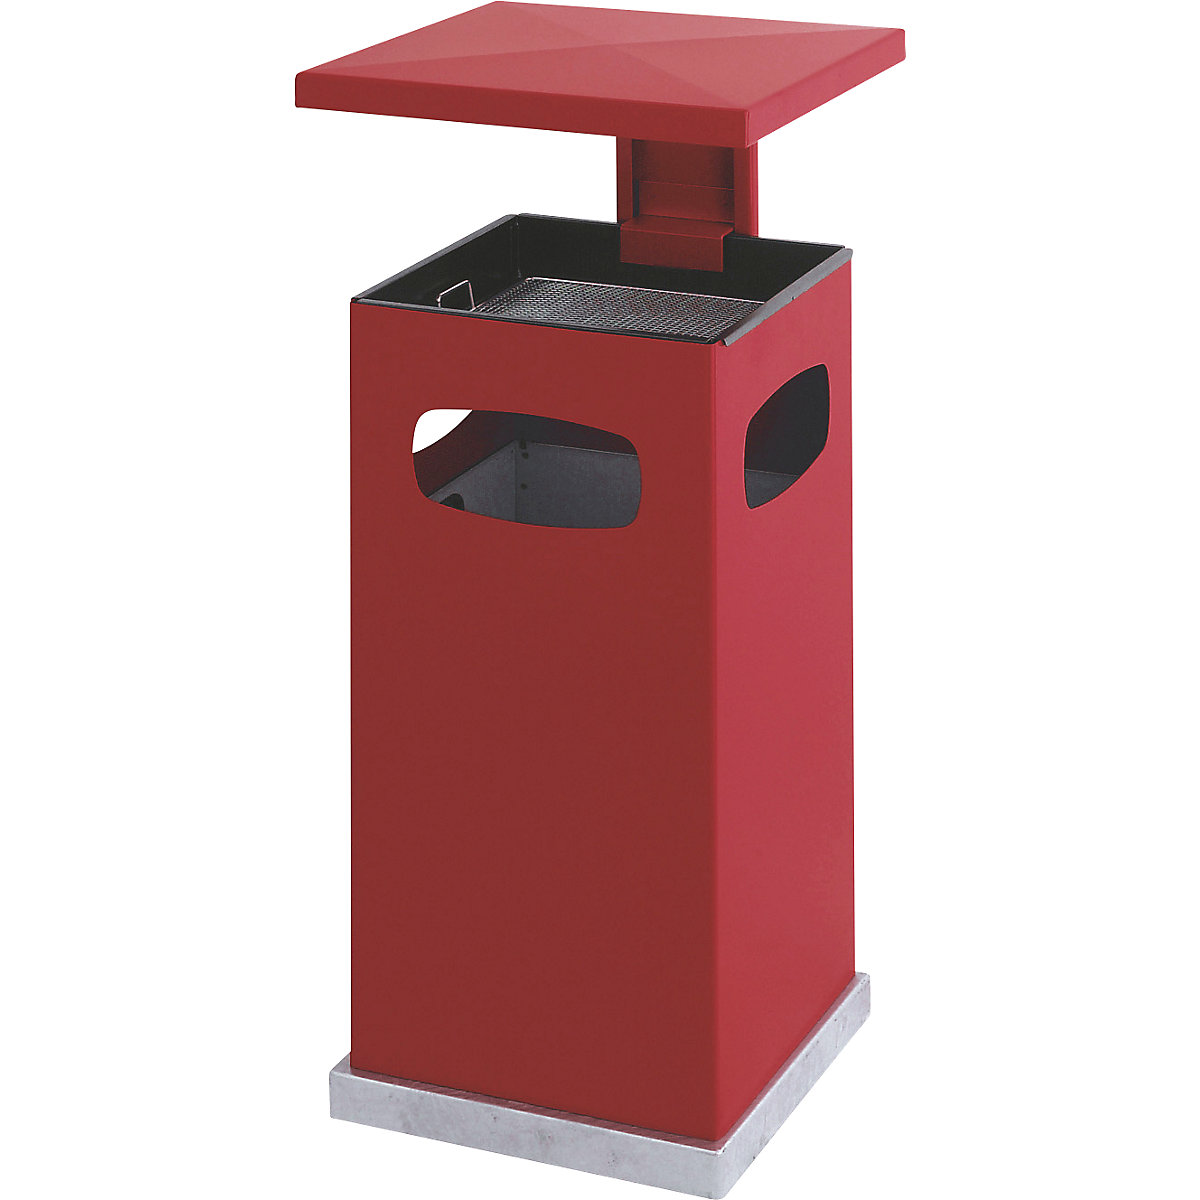 Waste collector with ashtray insert and protective cover, capacity 38 l, WxHxD 395 x 910 x 395 mm, flame red